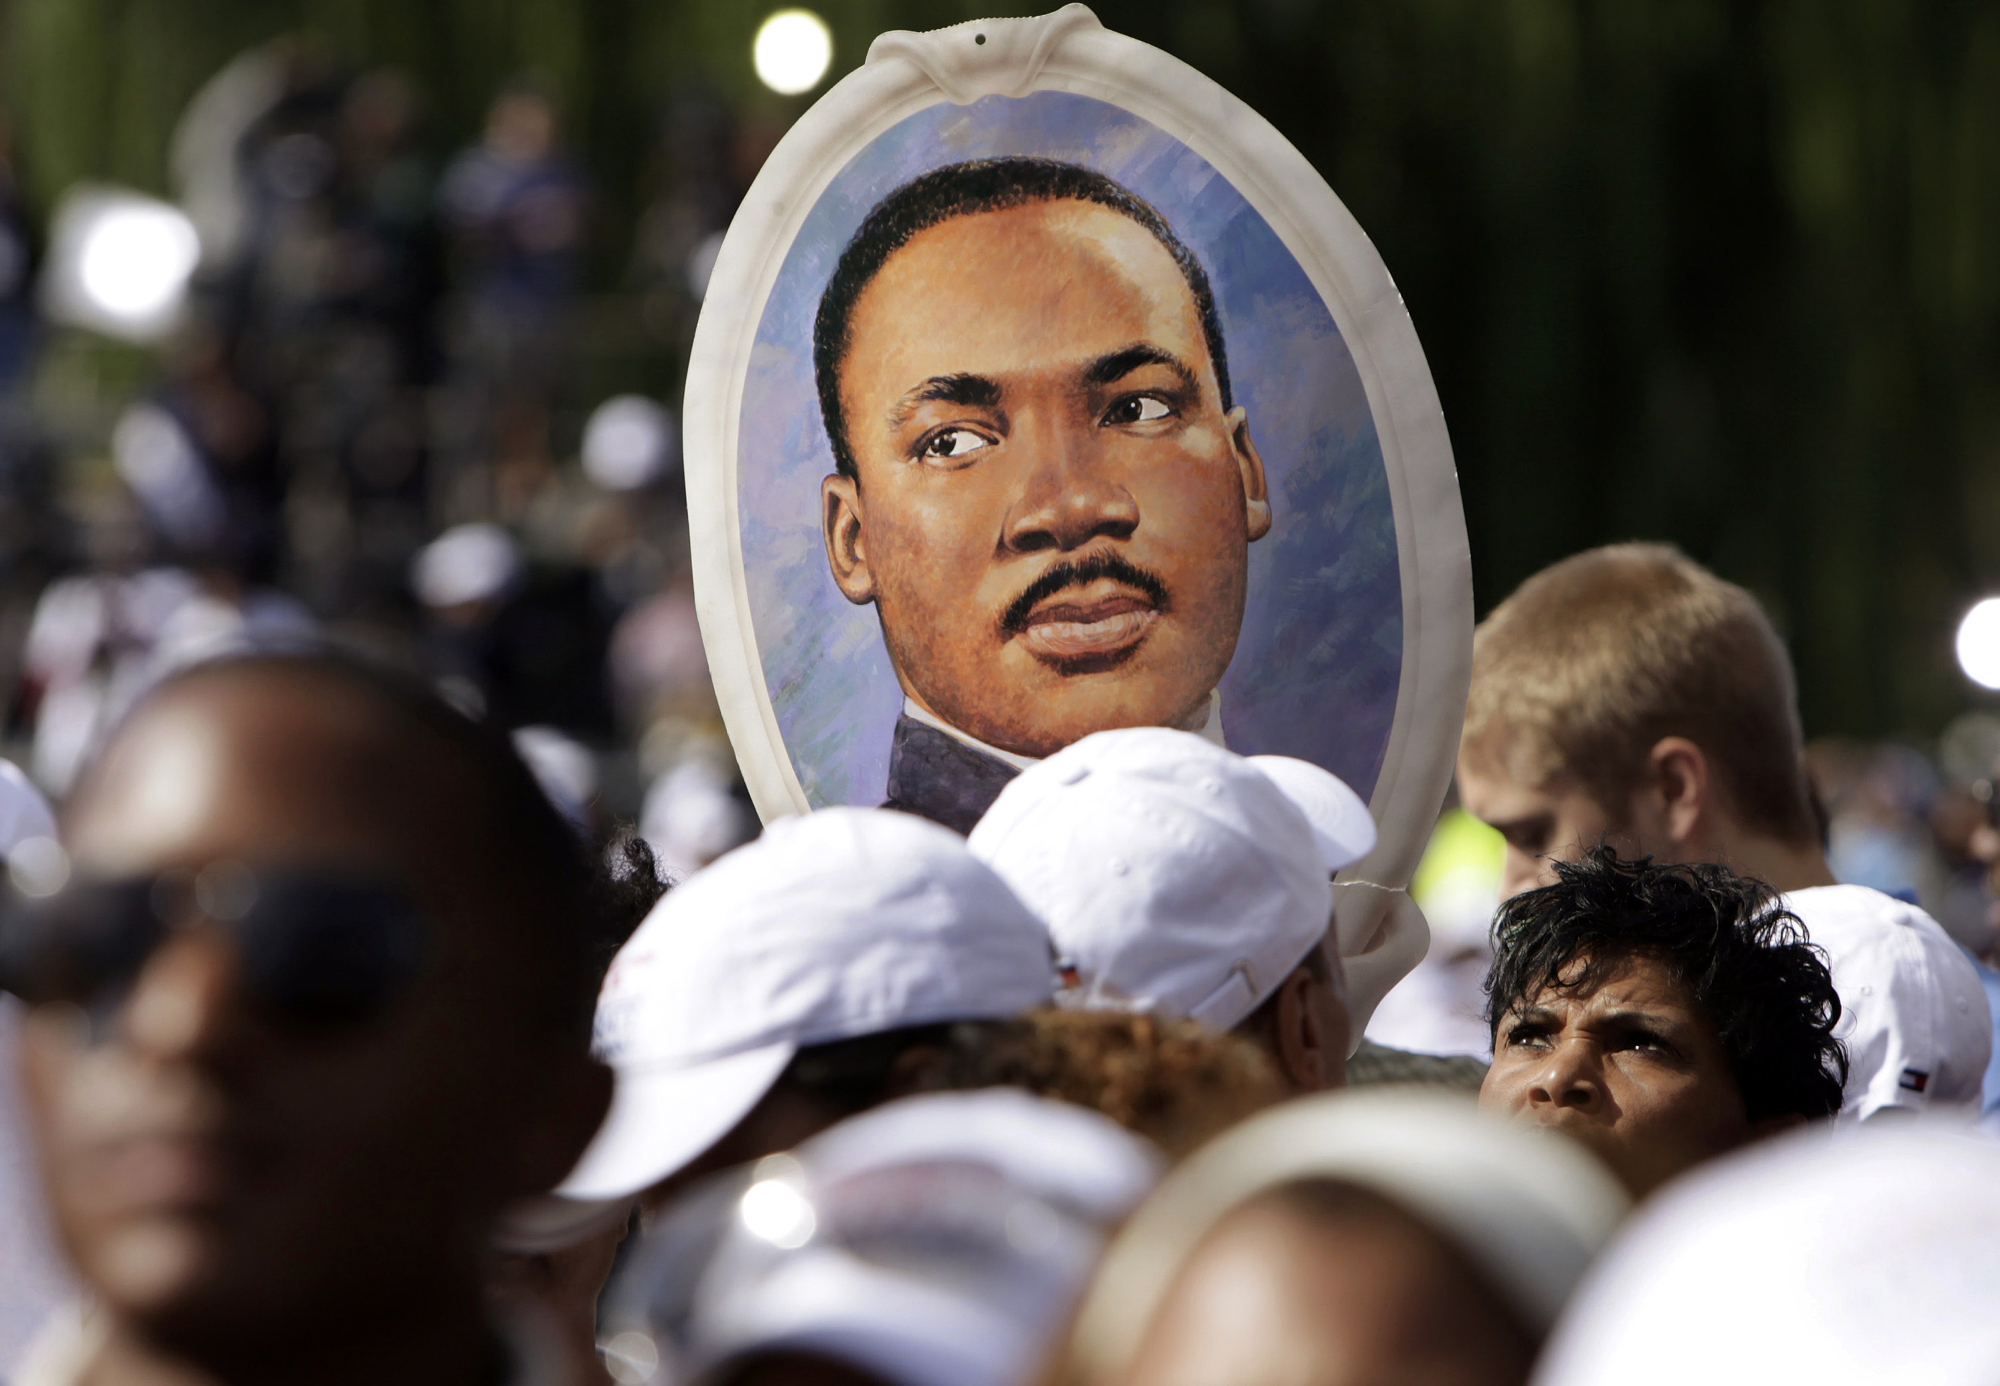 Non-violence ‘at heart of Martin Luther King’s message’